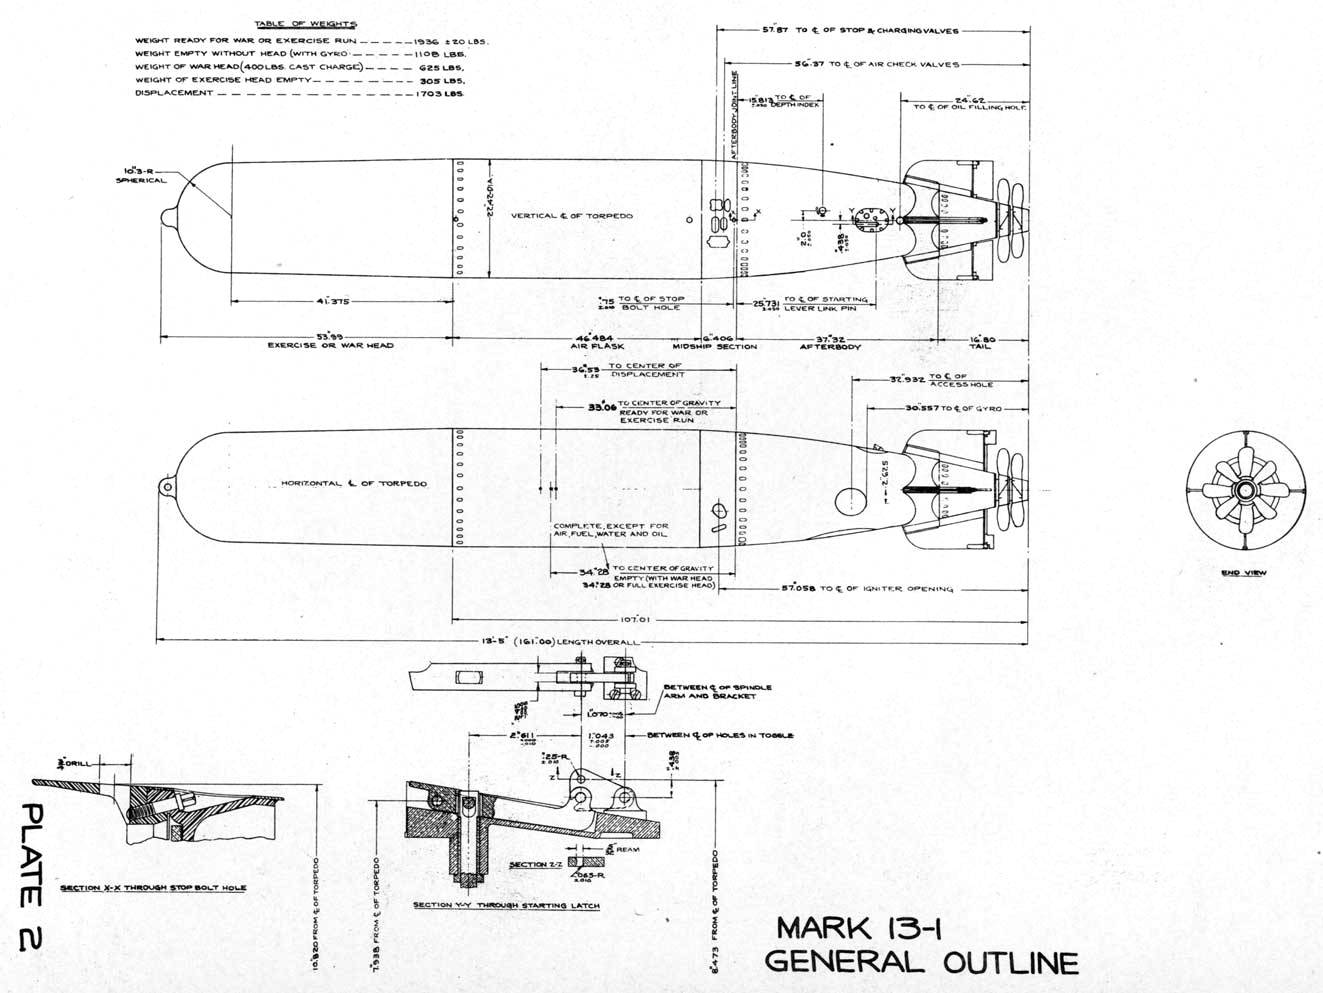 Line drawing of the Mark XIII aerial torpedo taken from the US Navy Bureau of Ordinance (BuOrd) Ordinance Pamphlet, Jul 1942. Photo 2 of 3.